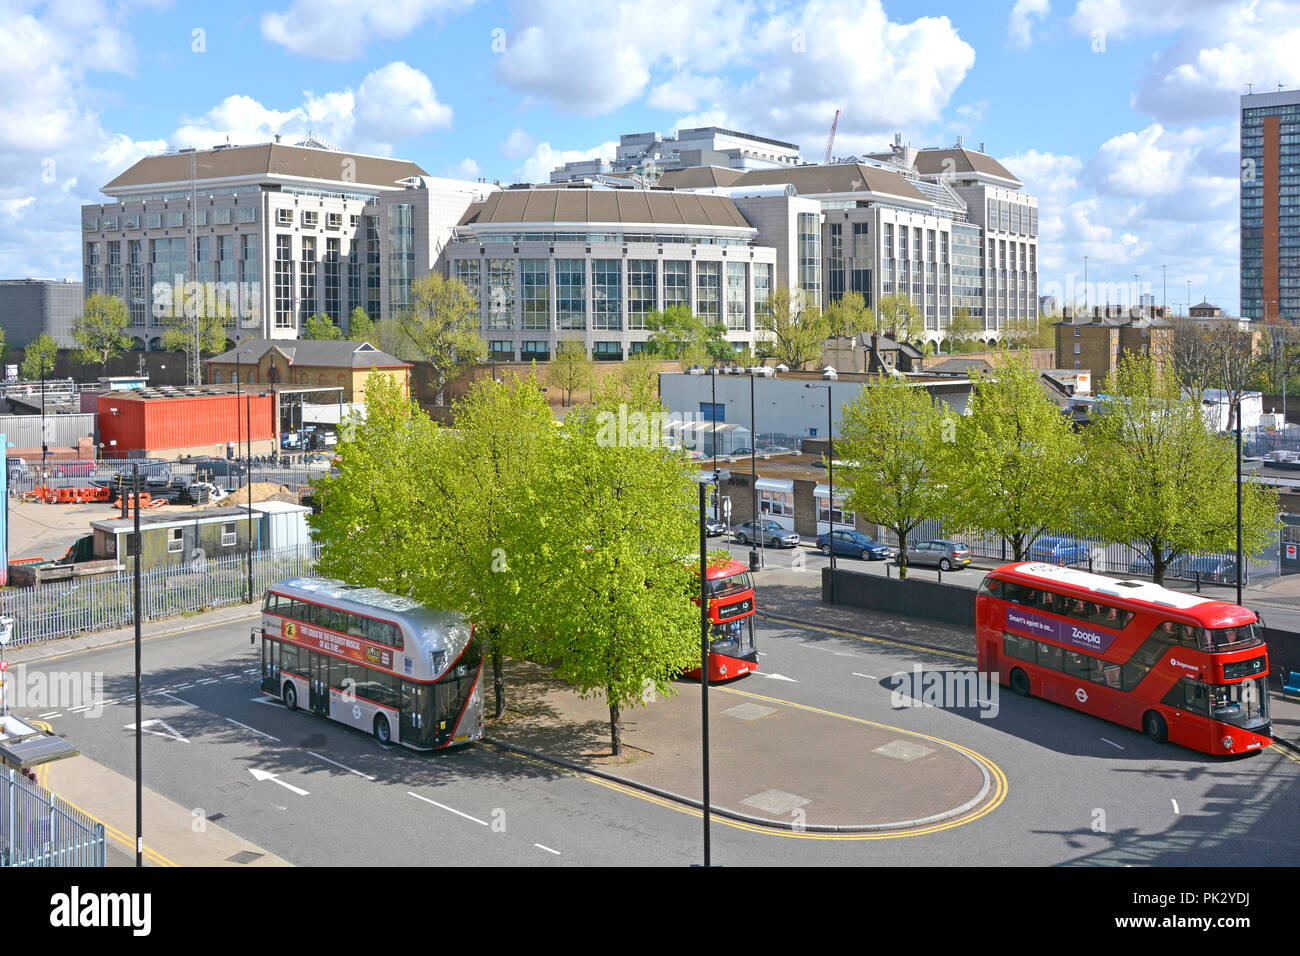 Looking down on London street scene double decker buses wait at bus stop outside Blackwall DLR station Tower Hamlets Council Offices beyond England UK Stock Photo